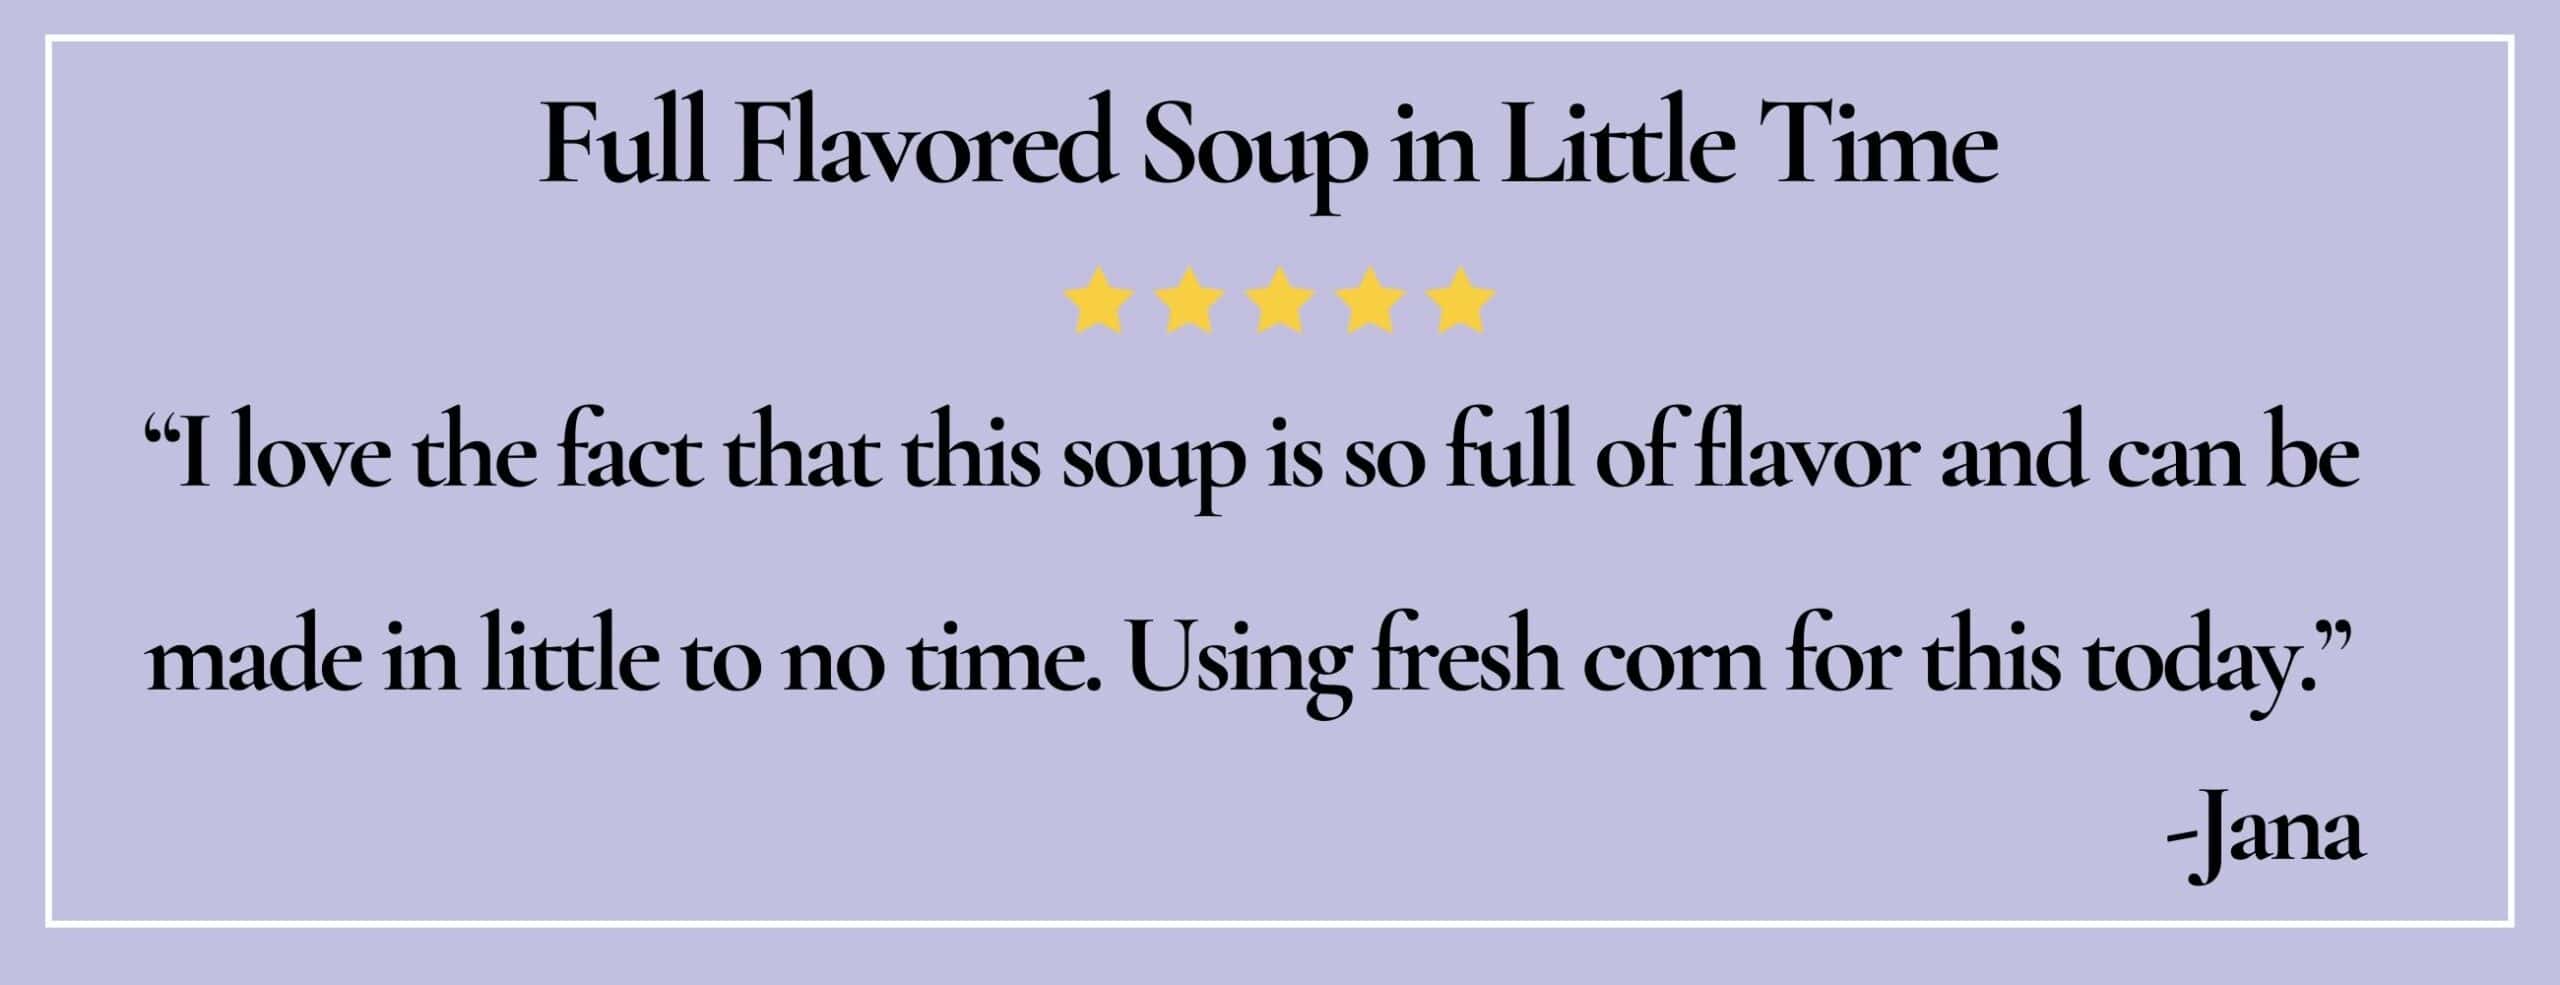 text box with paraphrase: I love the fact that this soup is so full of flavor and can be made in little to no time. -Jana